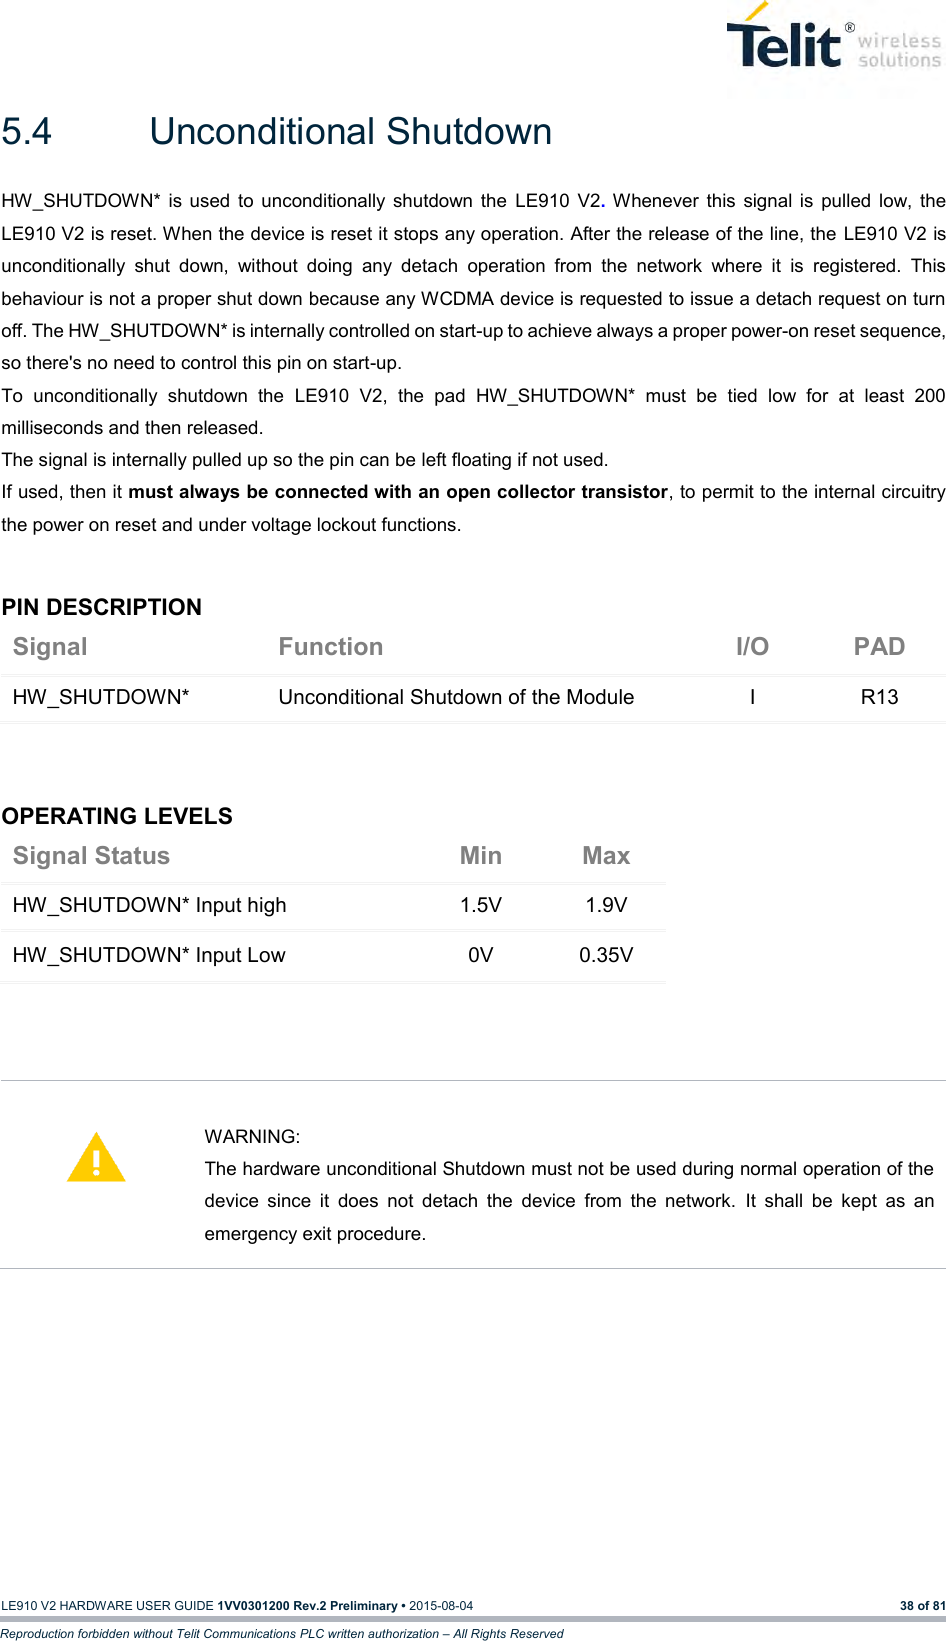   LE910 V2 HARDWARE USER GUIDE 1VV0301200 Rev.2 Preliminary • 2015-08-04 38 of 81 Reproduction forbidden without Telit Communications PLC written authorization – All Rights Reserved 5.4  Unconditional Shutdown HW_SHUTDOWN*  is used  to  unconditionally  shutdown  the  LE910  V2.  Whenever  this  signal  is  pulled  low,  the LE910 V2 is reset. When the device is reset it stops any operation. After the release of the line, the LE910 V2 is unconditionally  shut  down,  without  doing  any  detach  operation  from  the  network  where  it  is  registered.  This behaviour is not a proper shut down because any WCDMA device is requested to issue a detach request on turn off. The HW_SHUTDOWN* is internally controlled on start-up to achieve always a proper power-on reset sequence, so there&apos;s no need to control this pin on start-up.  To  unconditionally  shutdown  the  LE910  V2,  the  pad  HW_SHUTDOWN*  must  be  tied  low  for  at  least  200 milliseconds and then released. The signal is internally pulled up so the pin can be left floating if not used. If used, then it must always be connected with an open collector transistor, to permit to the internal circuitry the power on reset and under voltage lockout functions.  PIN DESCRIPTION Signal Function I/O PAD HW_SHUTDOWN* Unconditional Shutdown of the Module I R13    OPERATING LEVELS Signal Status Min Max HW_SHUTDOWN* Input high 1.5V 1.9V HW_SHUTDOWN* Input Low 0V 0.35V       WARNING: The hardware unconditional Shutdown must not be used during normal operation of the device  since  it  does  not  detach  the  device  from  the  network.  It  shall  be  kept  as  an emergency exit procedure.           